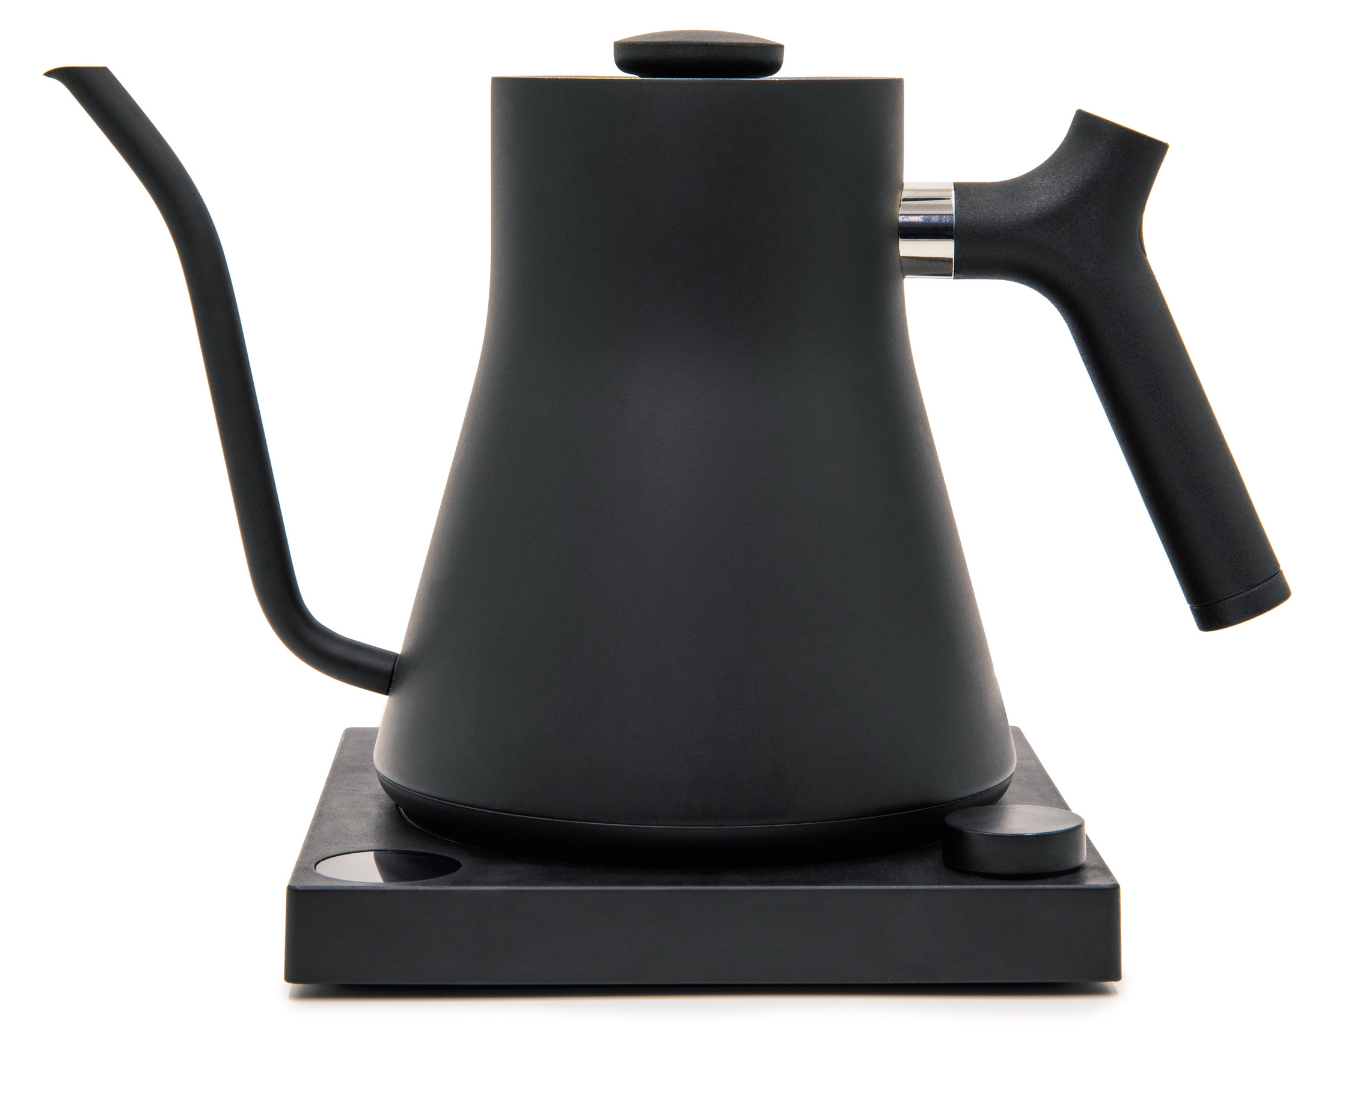 Fellow Stagg EKG Pour-Over Kettle, Variable Temperature Control